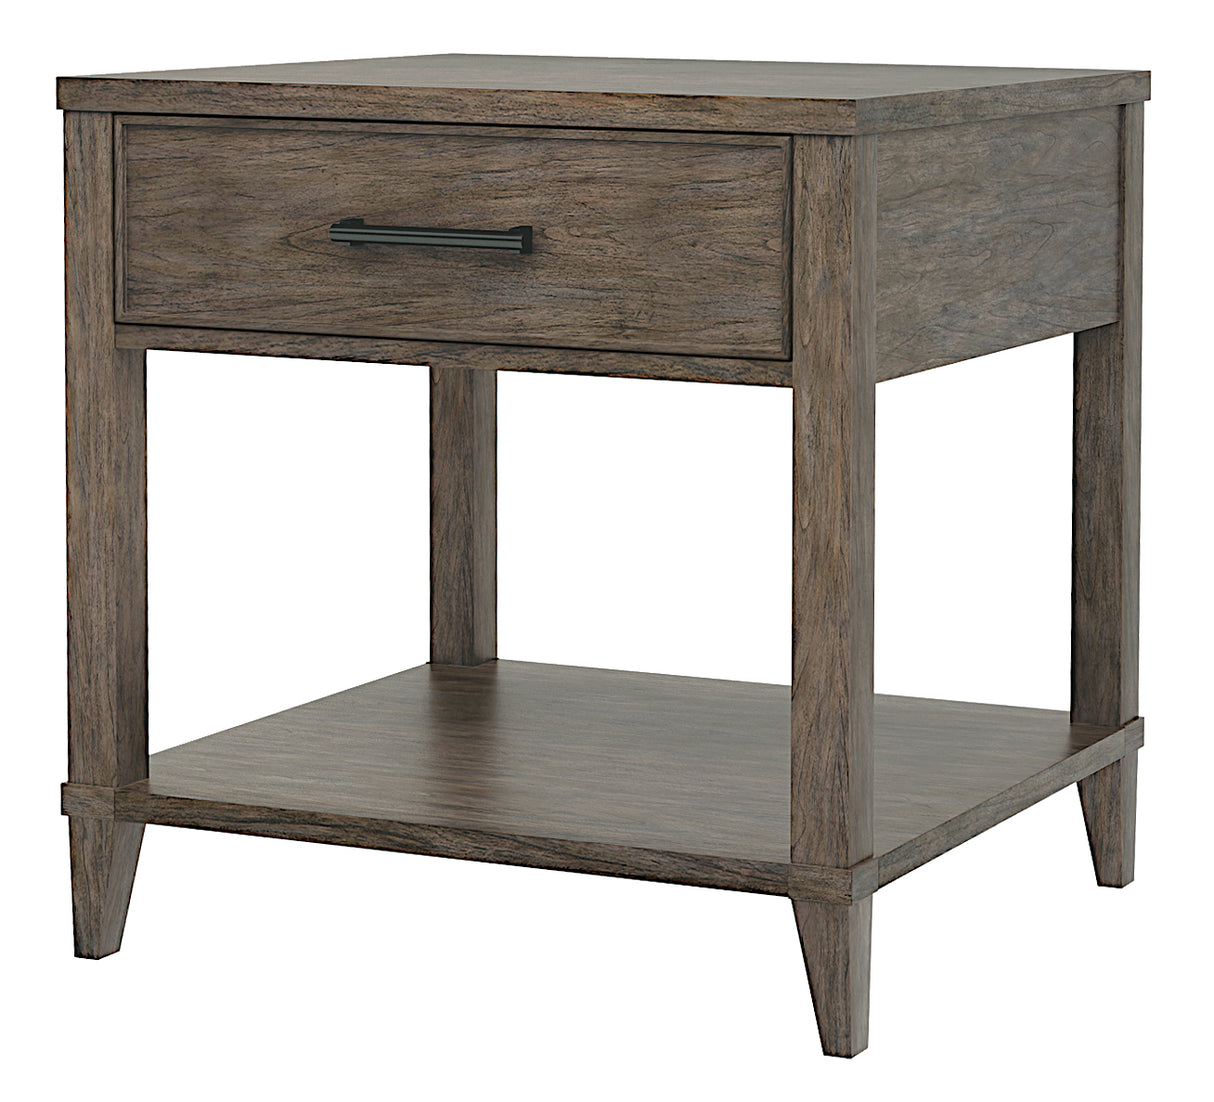 Hekman 25803 Arlington Heights 24in. x 27in. x 26.75in. End Table